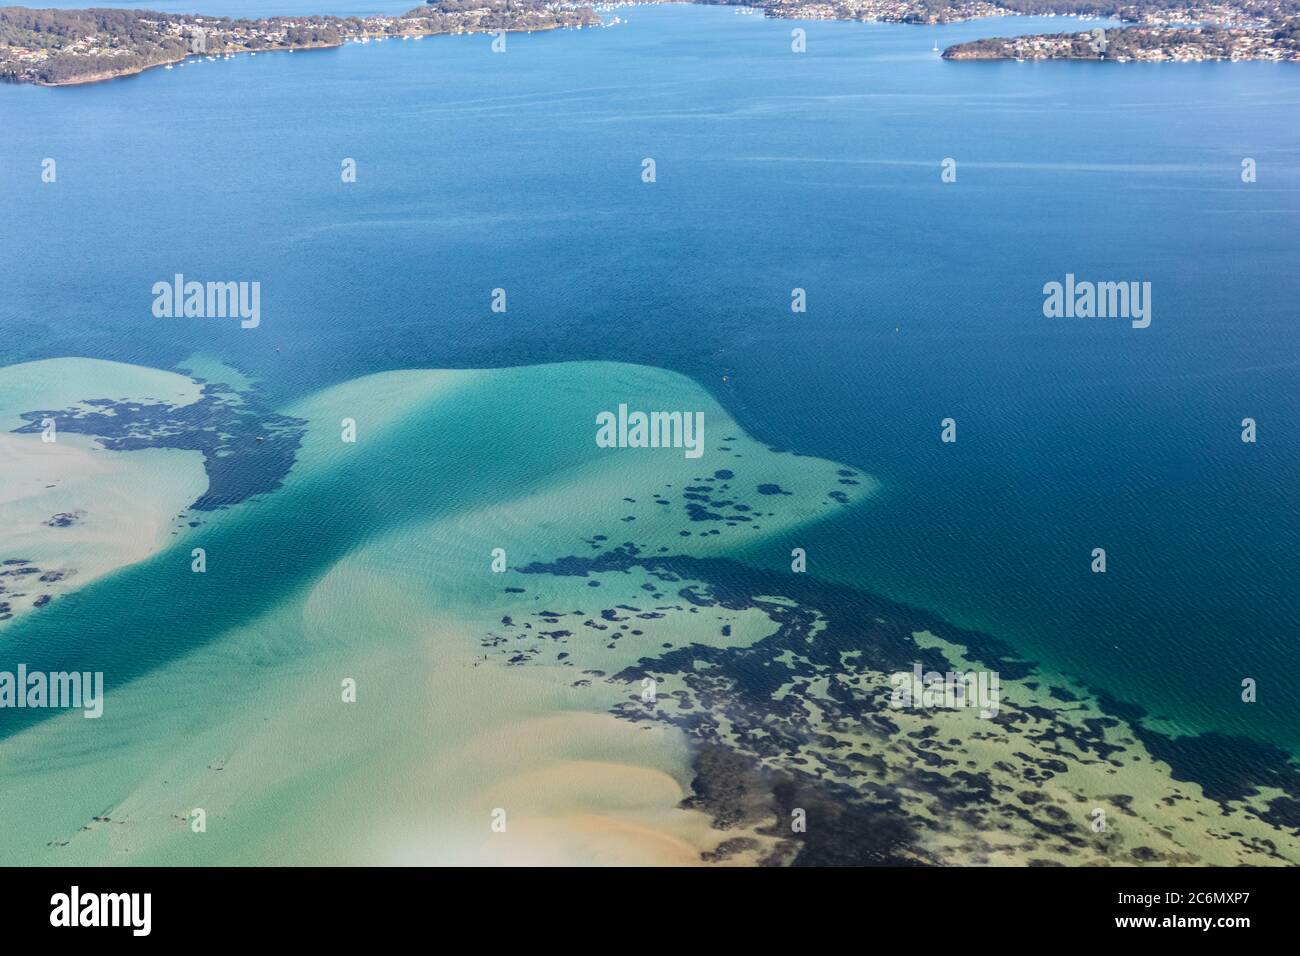 The drop off into Lake Macquarie at Swansea Channel - Newcastle NSW Australia. This salt water lake is one of the largest in Australia. Stock Photo